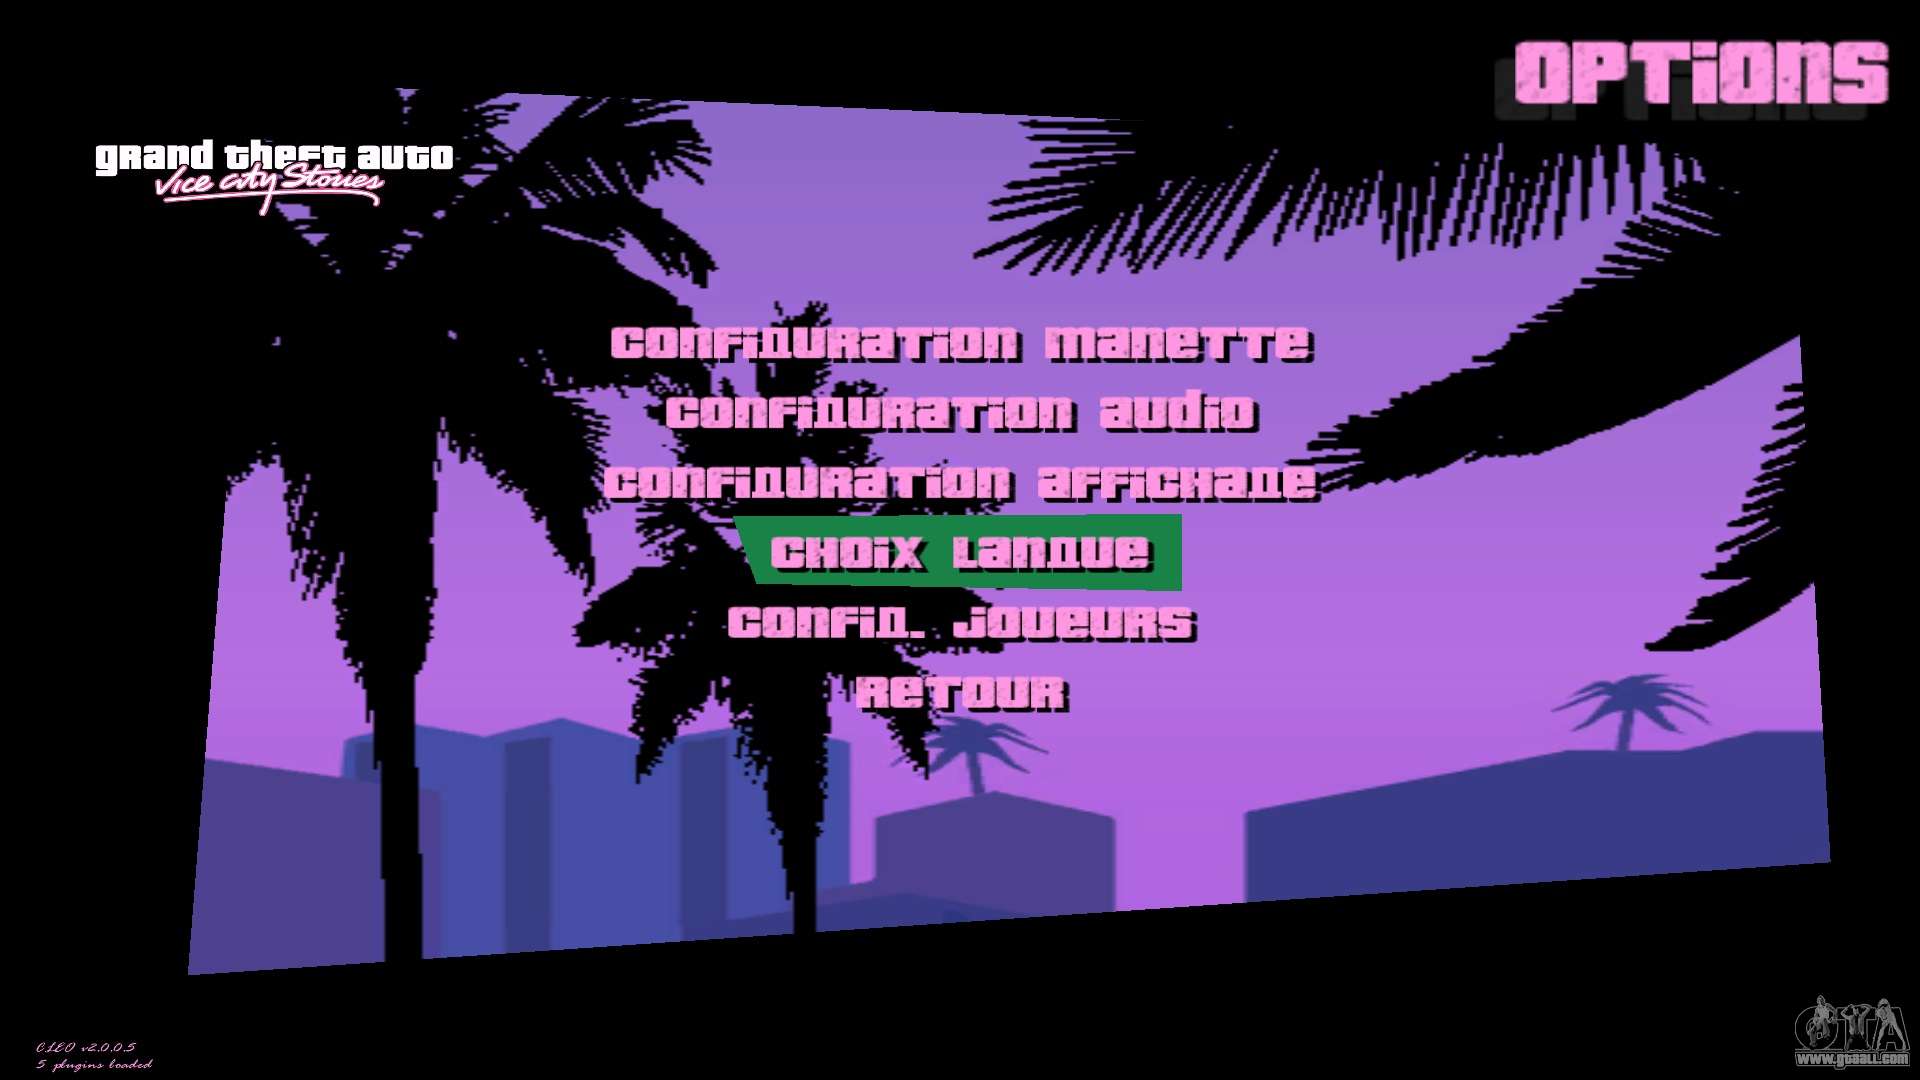 GTA Vice City 100% Savegame for Android Mod 